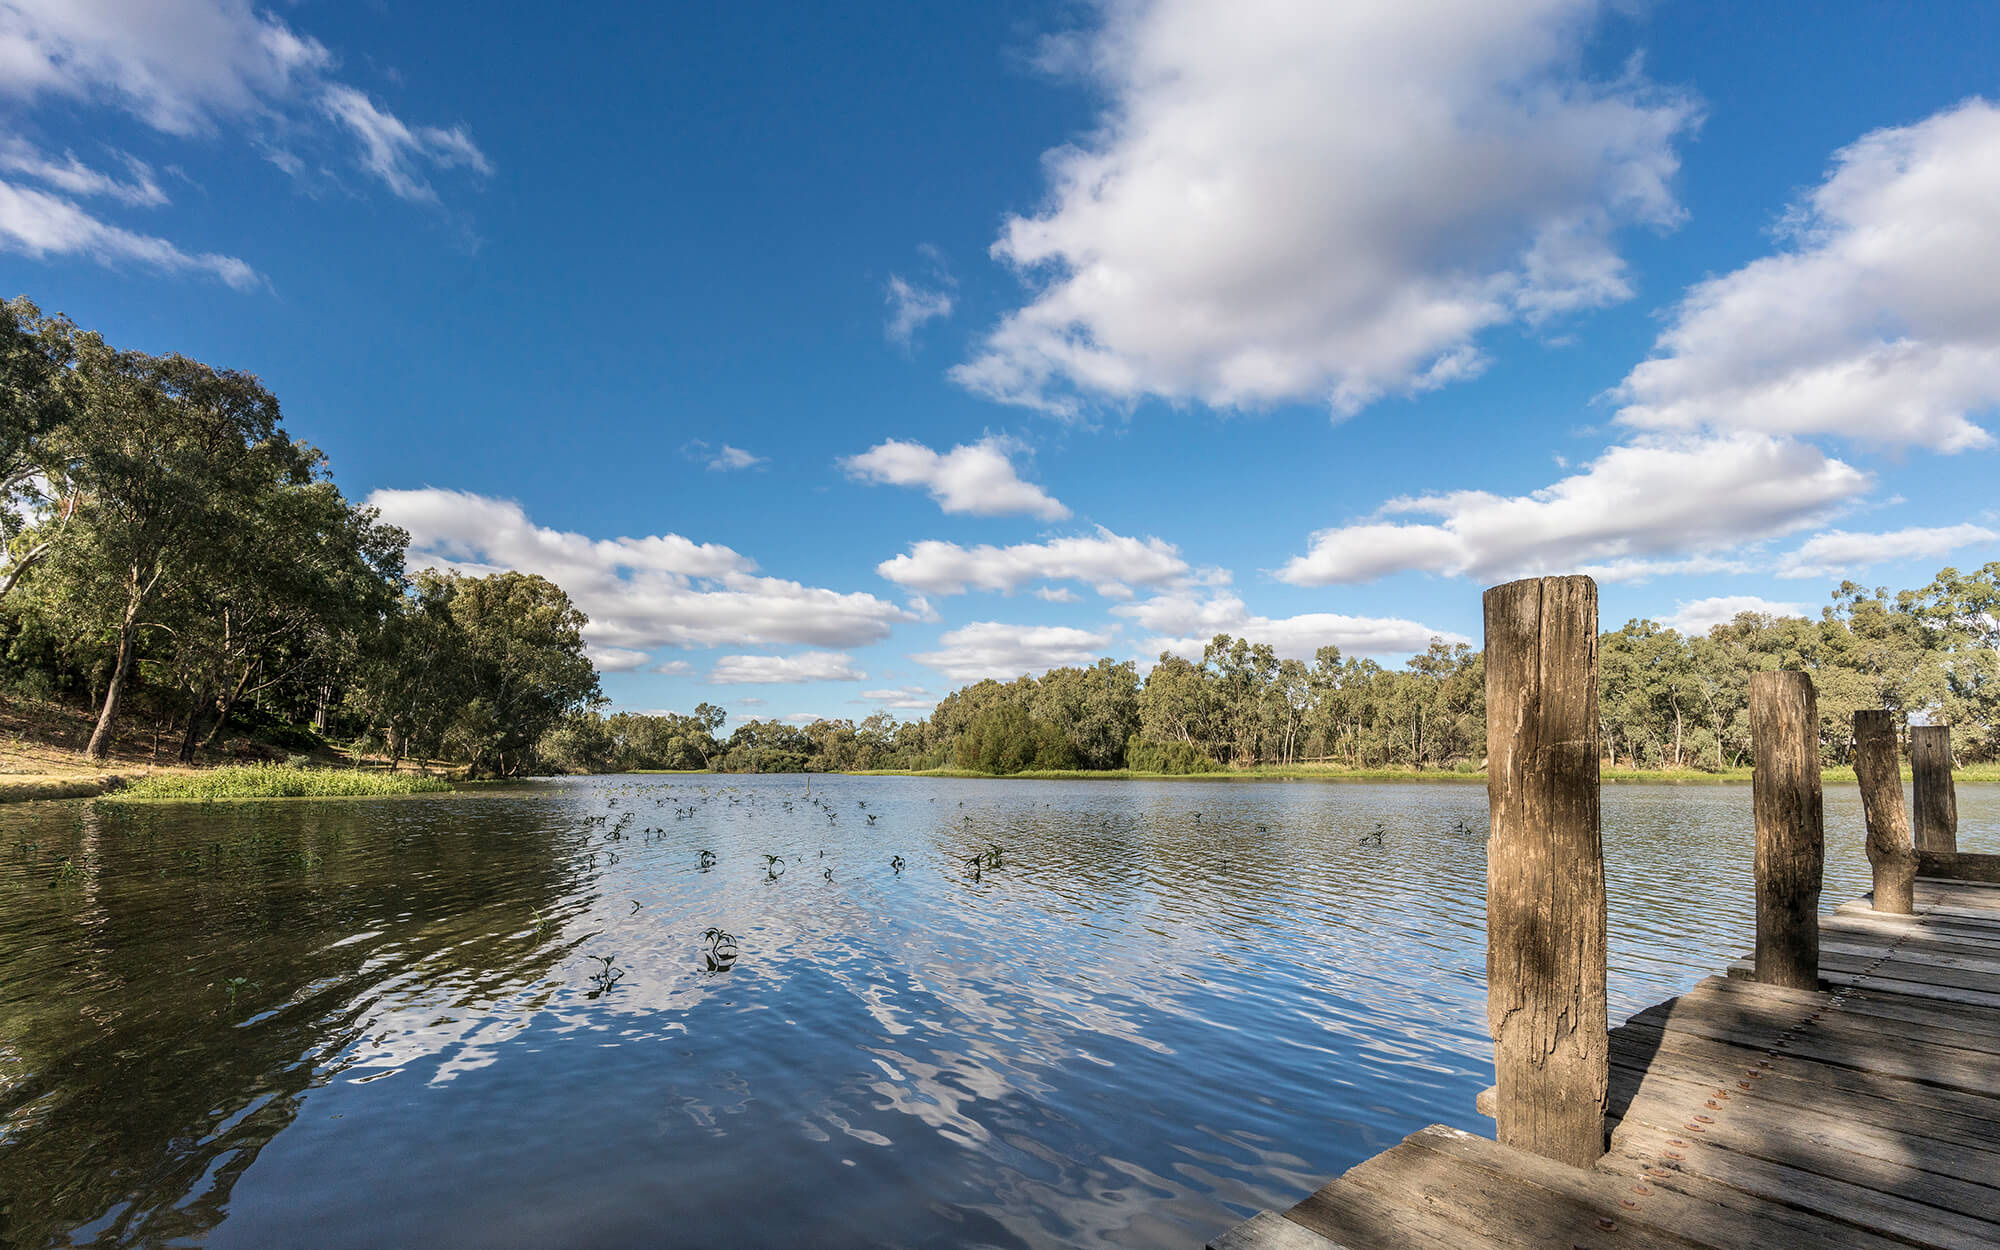 Gwydir Wetlands with a jetty in the foreground